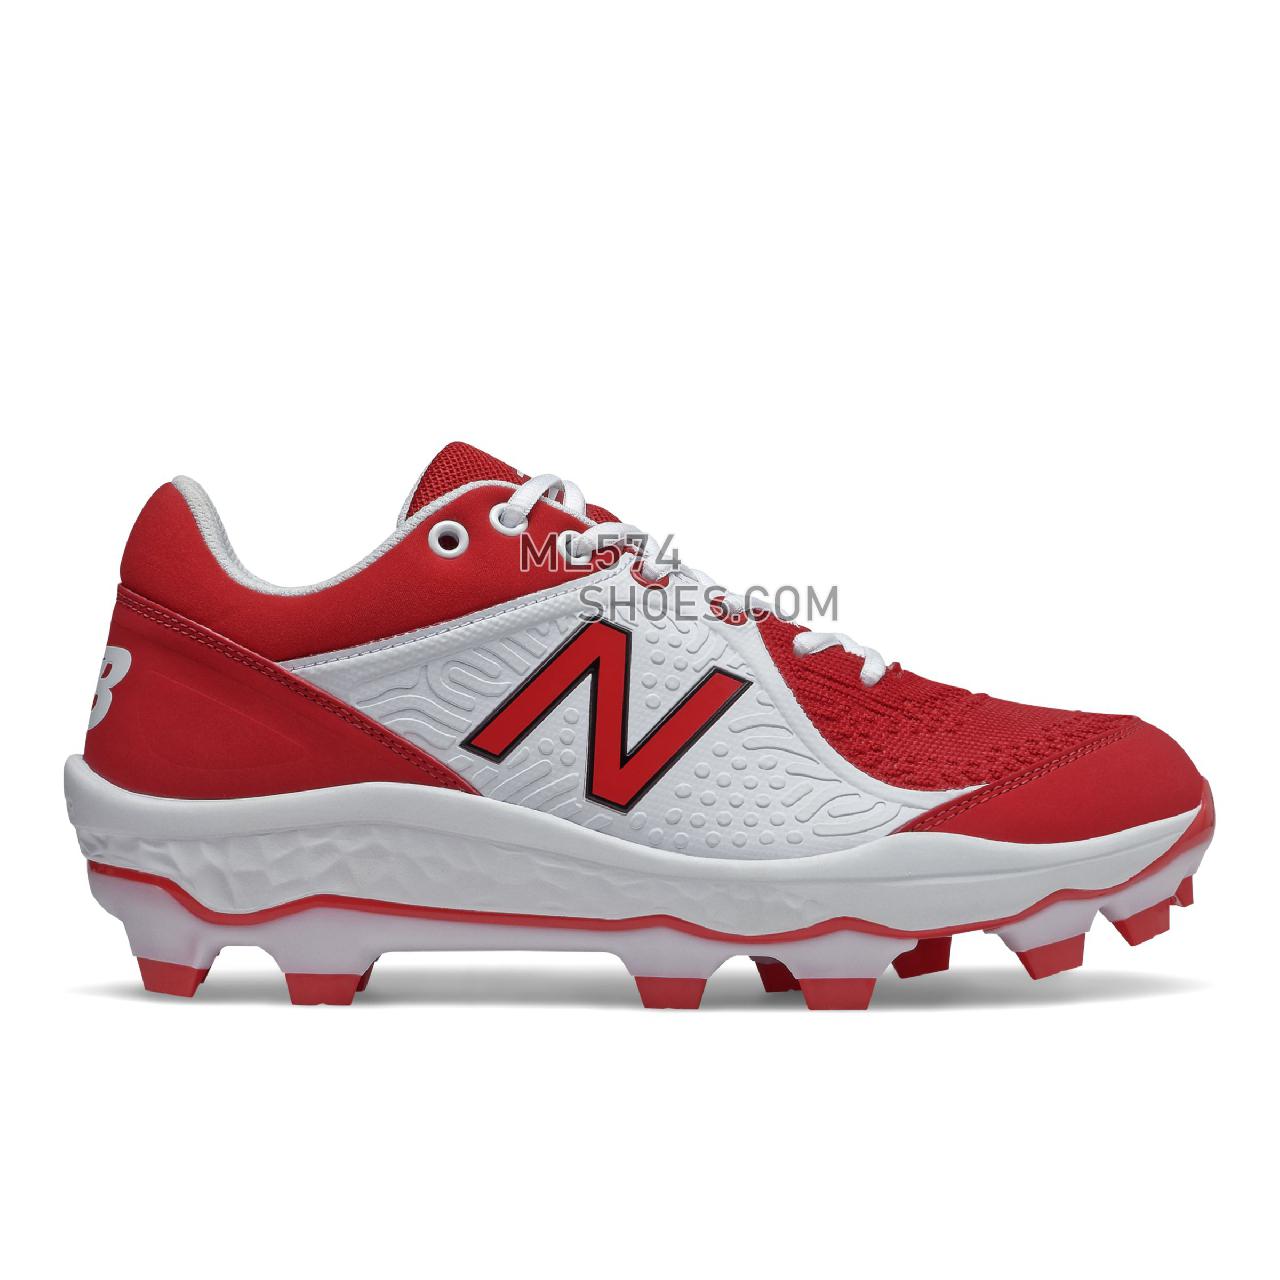 New Balance Fresh Foam 3000 v5 Molded - Men's Mid-Cut Baseball Cleats - Red with White - PL3000R5